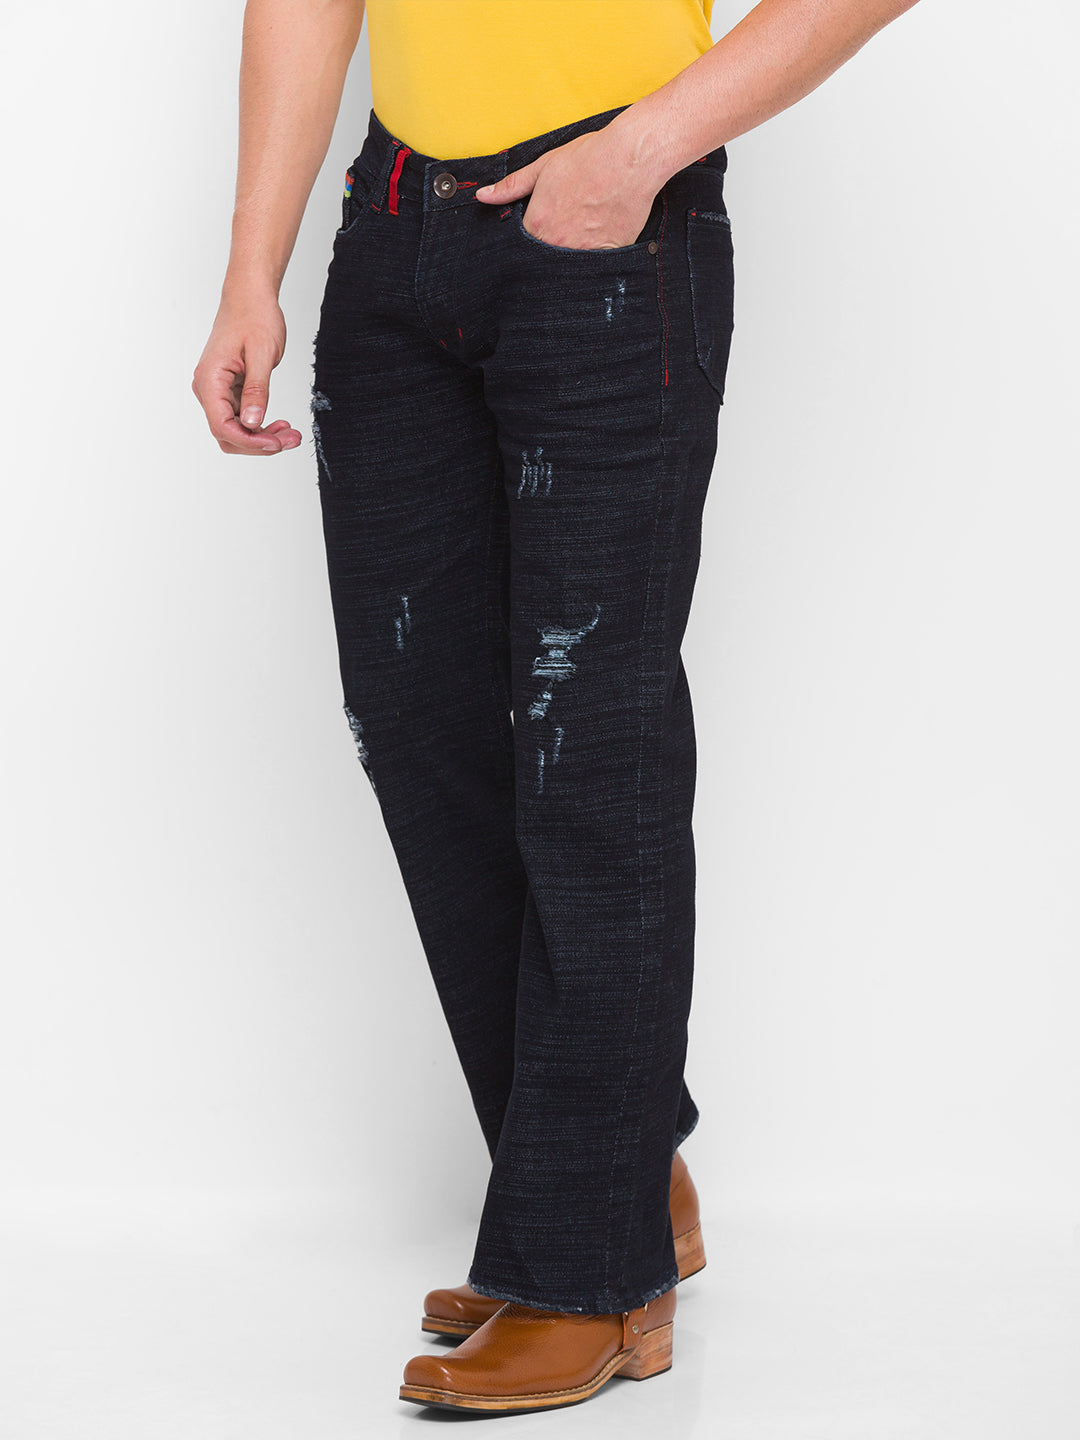 Navy Blue Comfort Fit Distressed Bootcut Jeans